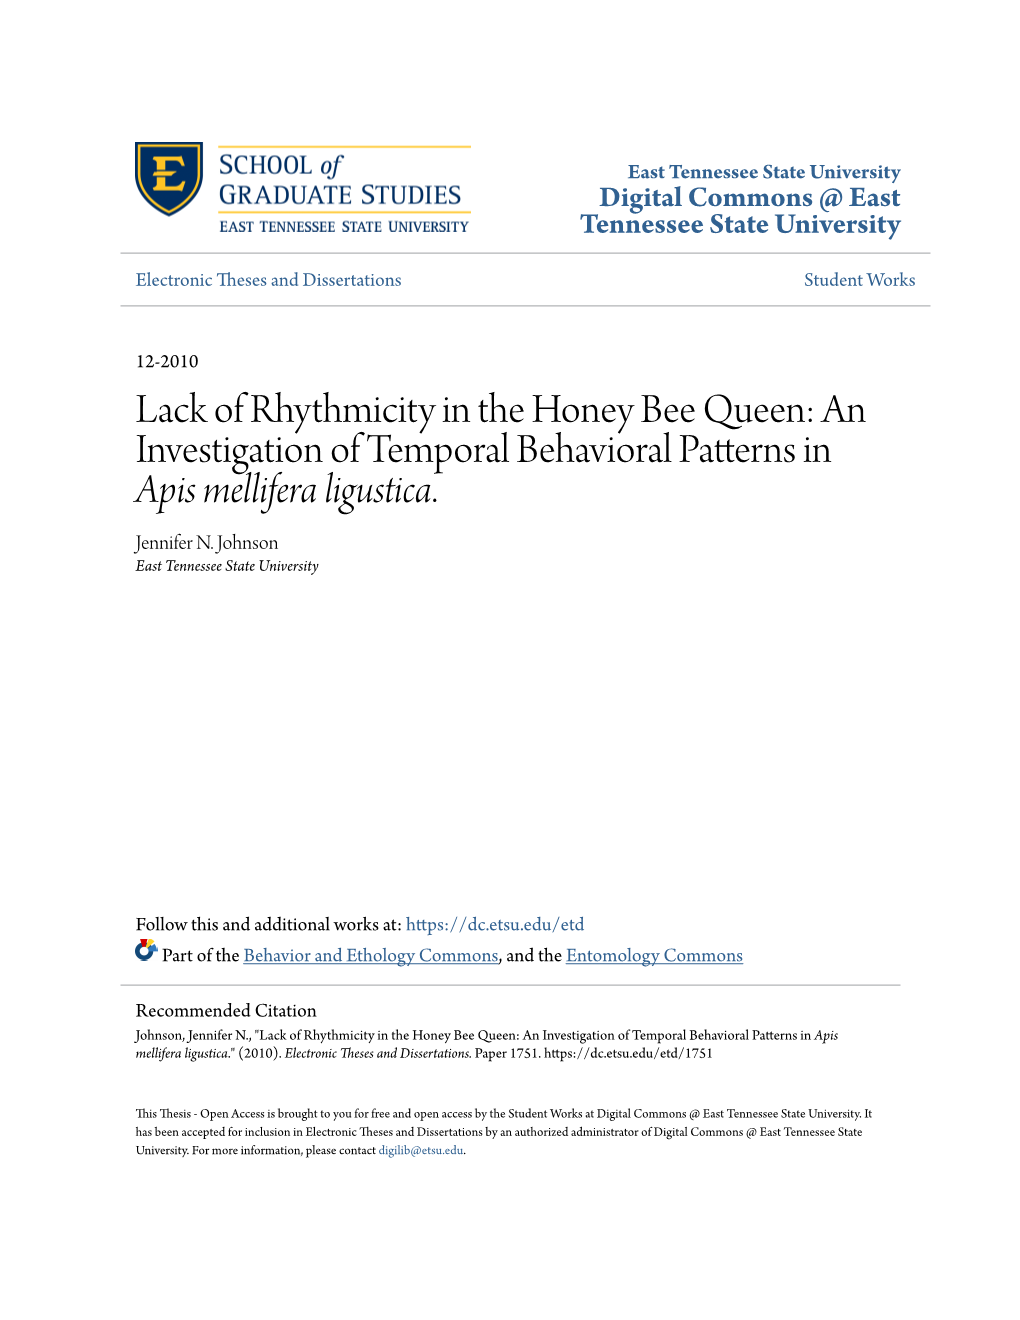 Lack of Rhythmicity in the Honey Bee Queen: an Investigation of Temporal Behavioral Patterns in Apis Mellifera Ligustica